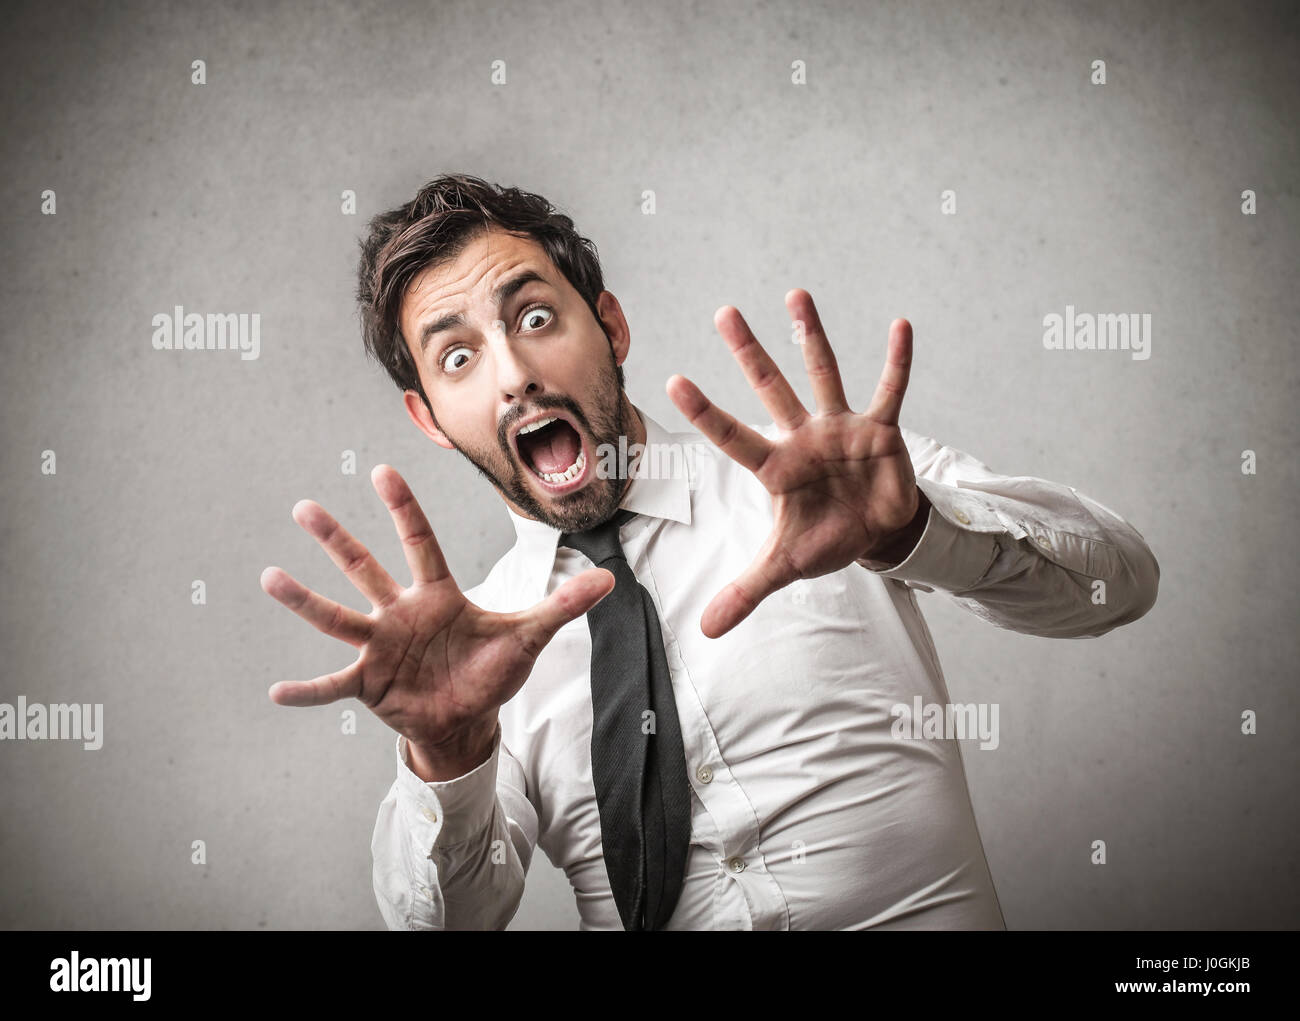 Man being scared Stock Photo